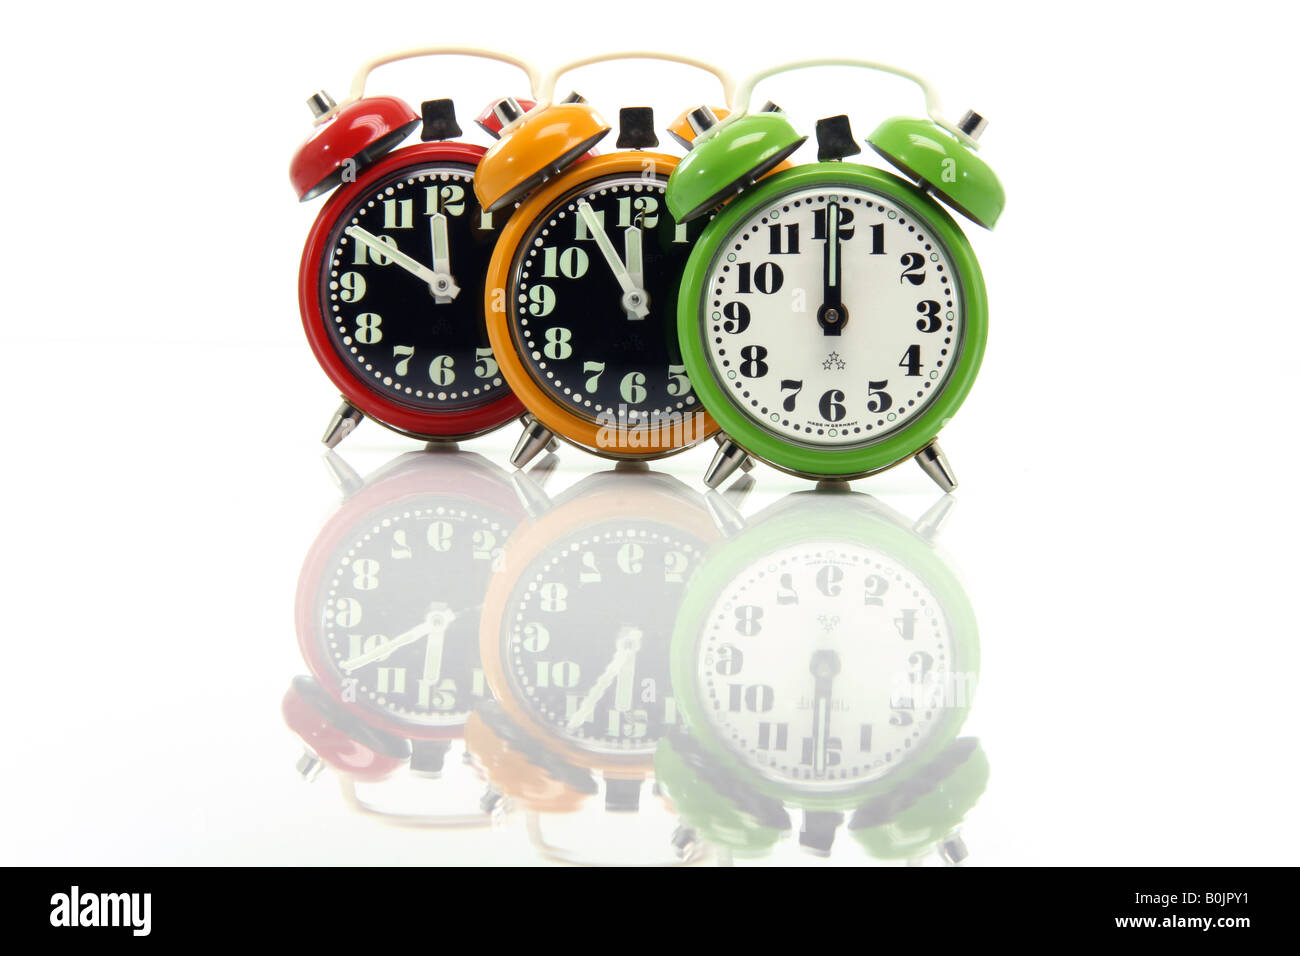 timing red yellow and green alarm clock untill twelve oclock closeup with nice reflection Stock Photo